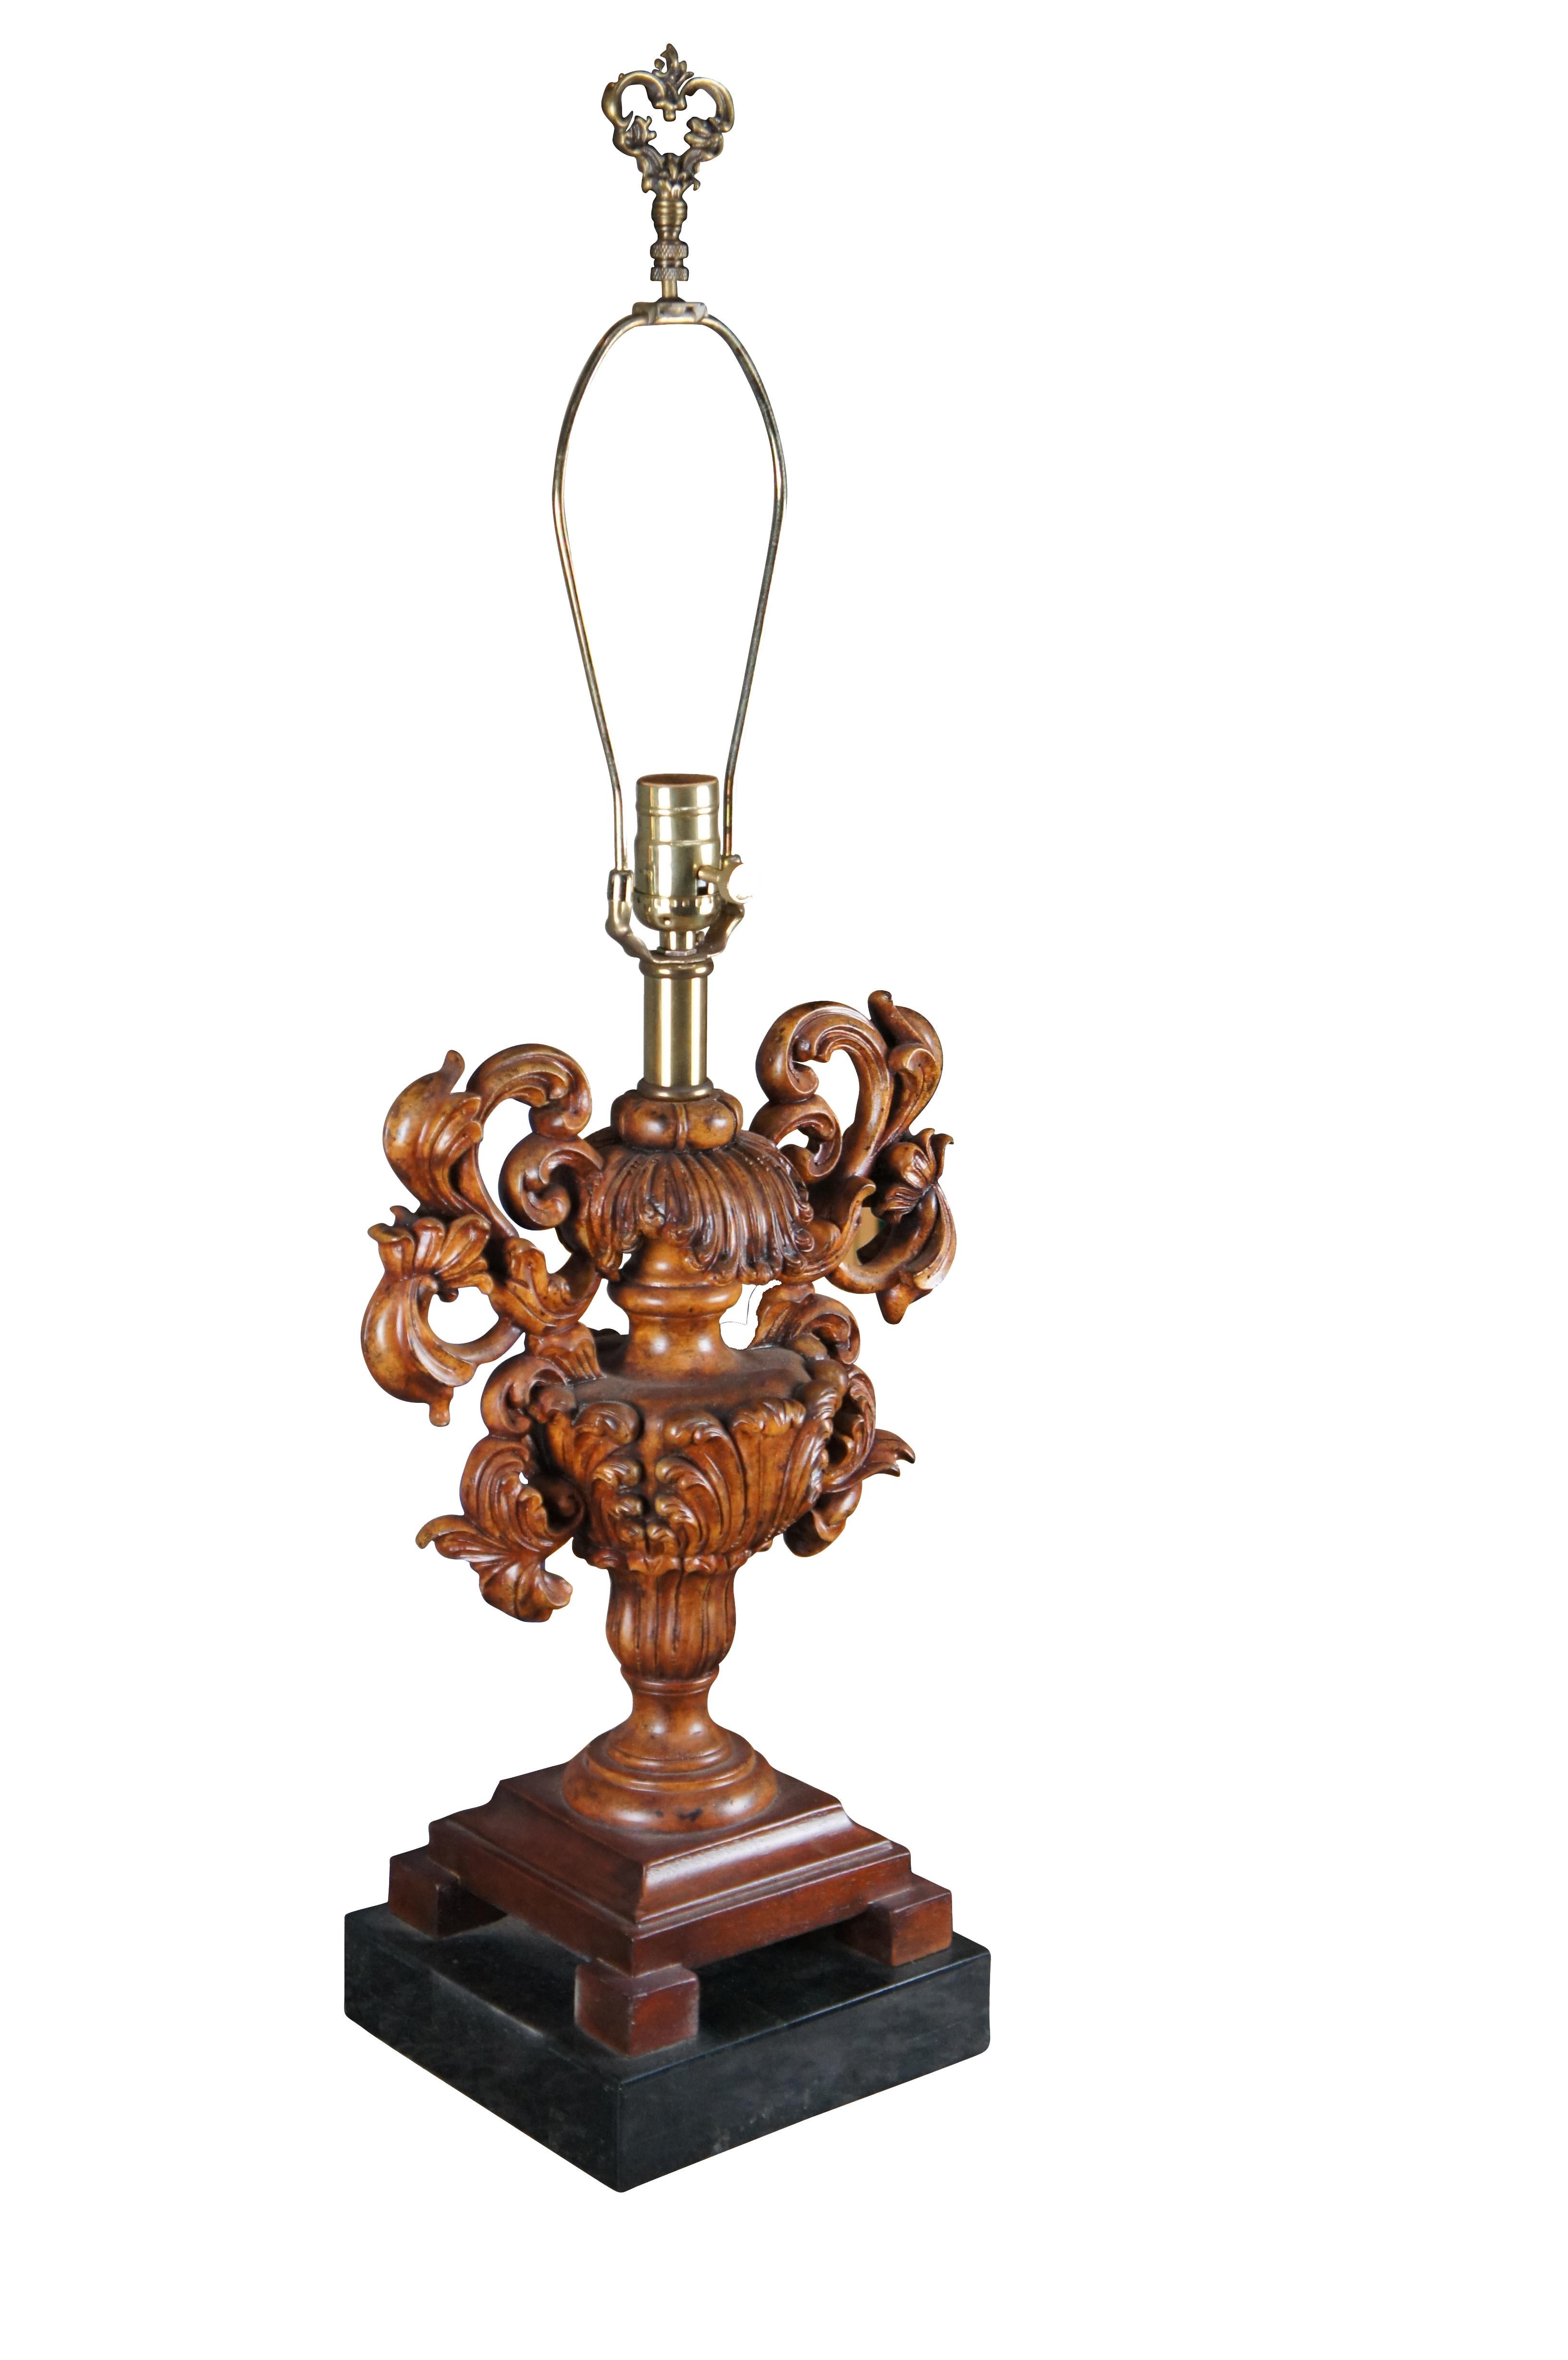 Late 20th Century Italian Baroque inspired table or buffet lamp by Maitland Smith. Features a carved mahogany acanthus scrolled urn over a tessellated marble base. Fixture is brass with elongated harp and ornate finial.

Dimensions:
11.5